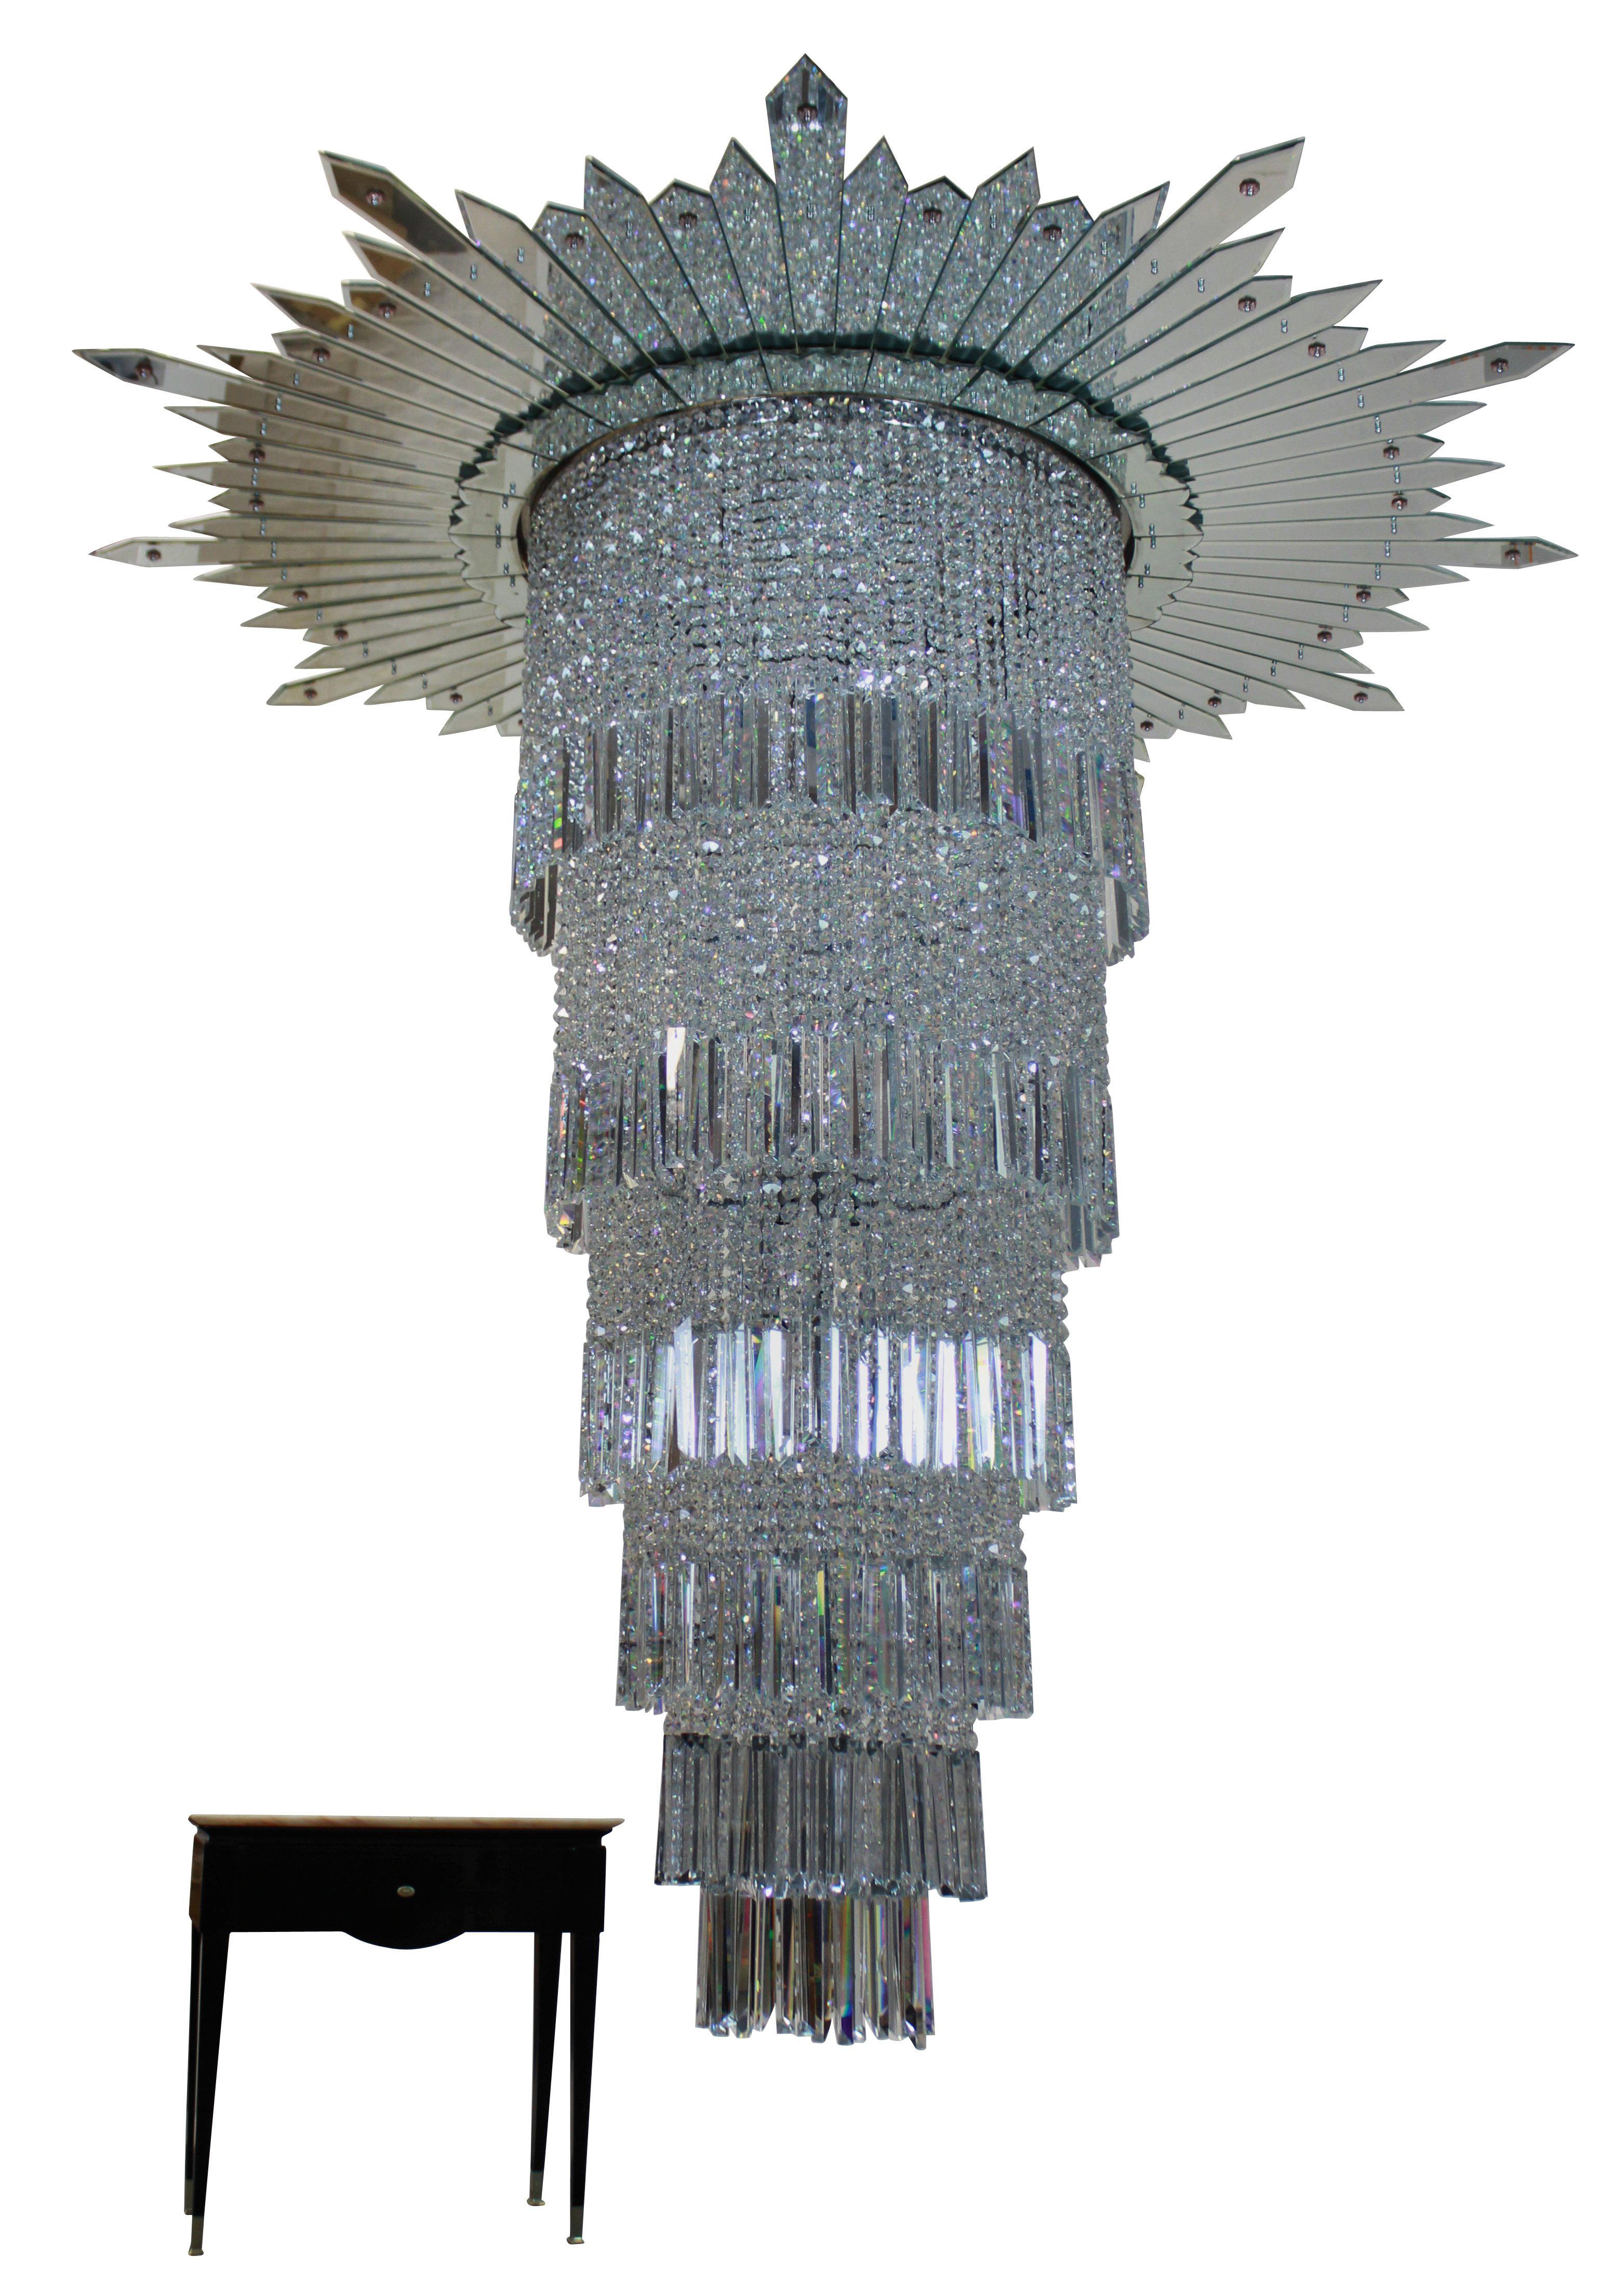 Mid-20th Century Very Large Art Deco Chandelier from the Original Adelphi Building, London